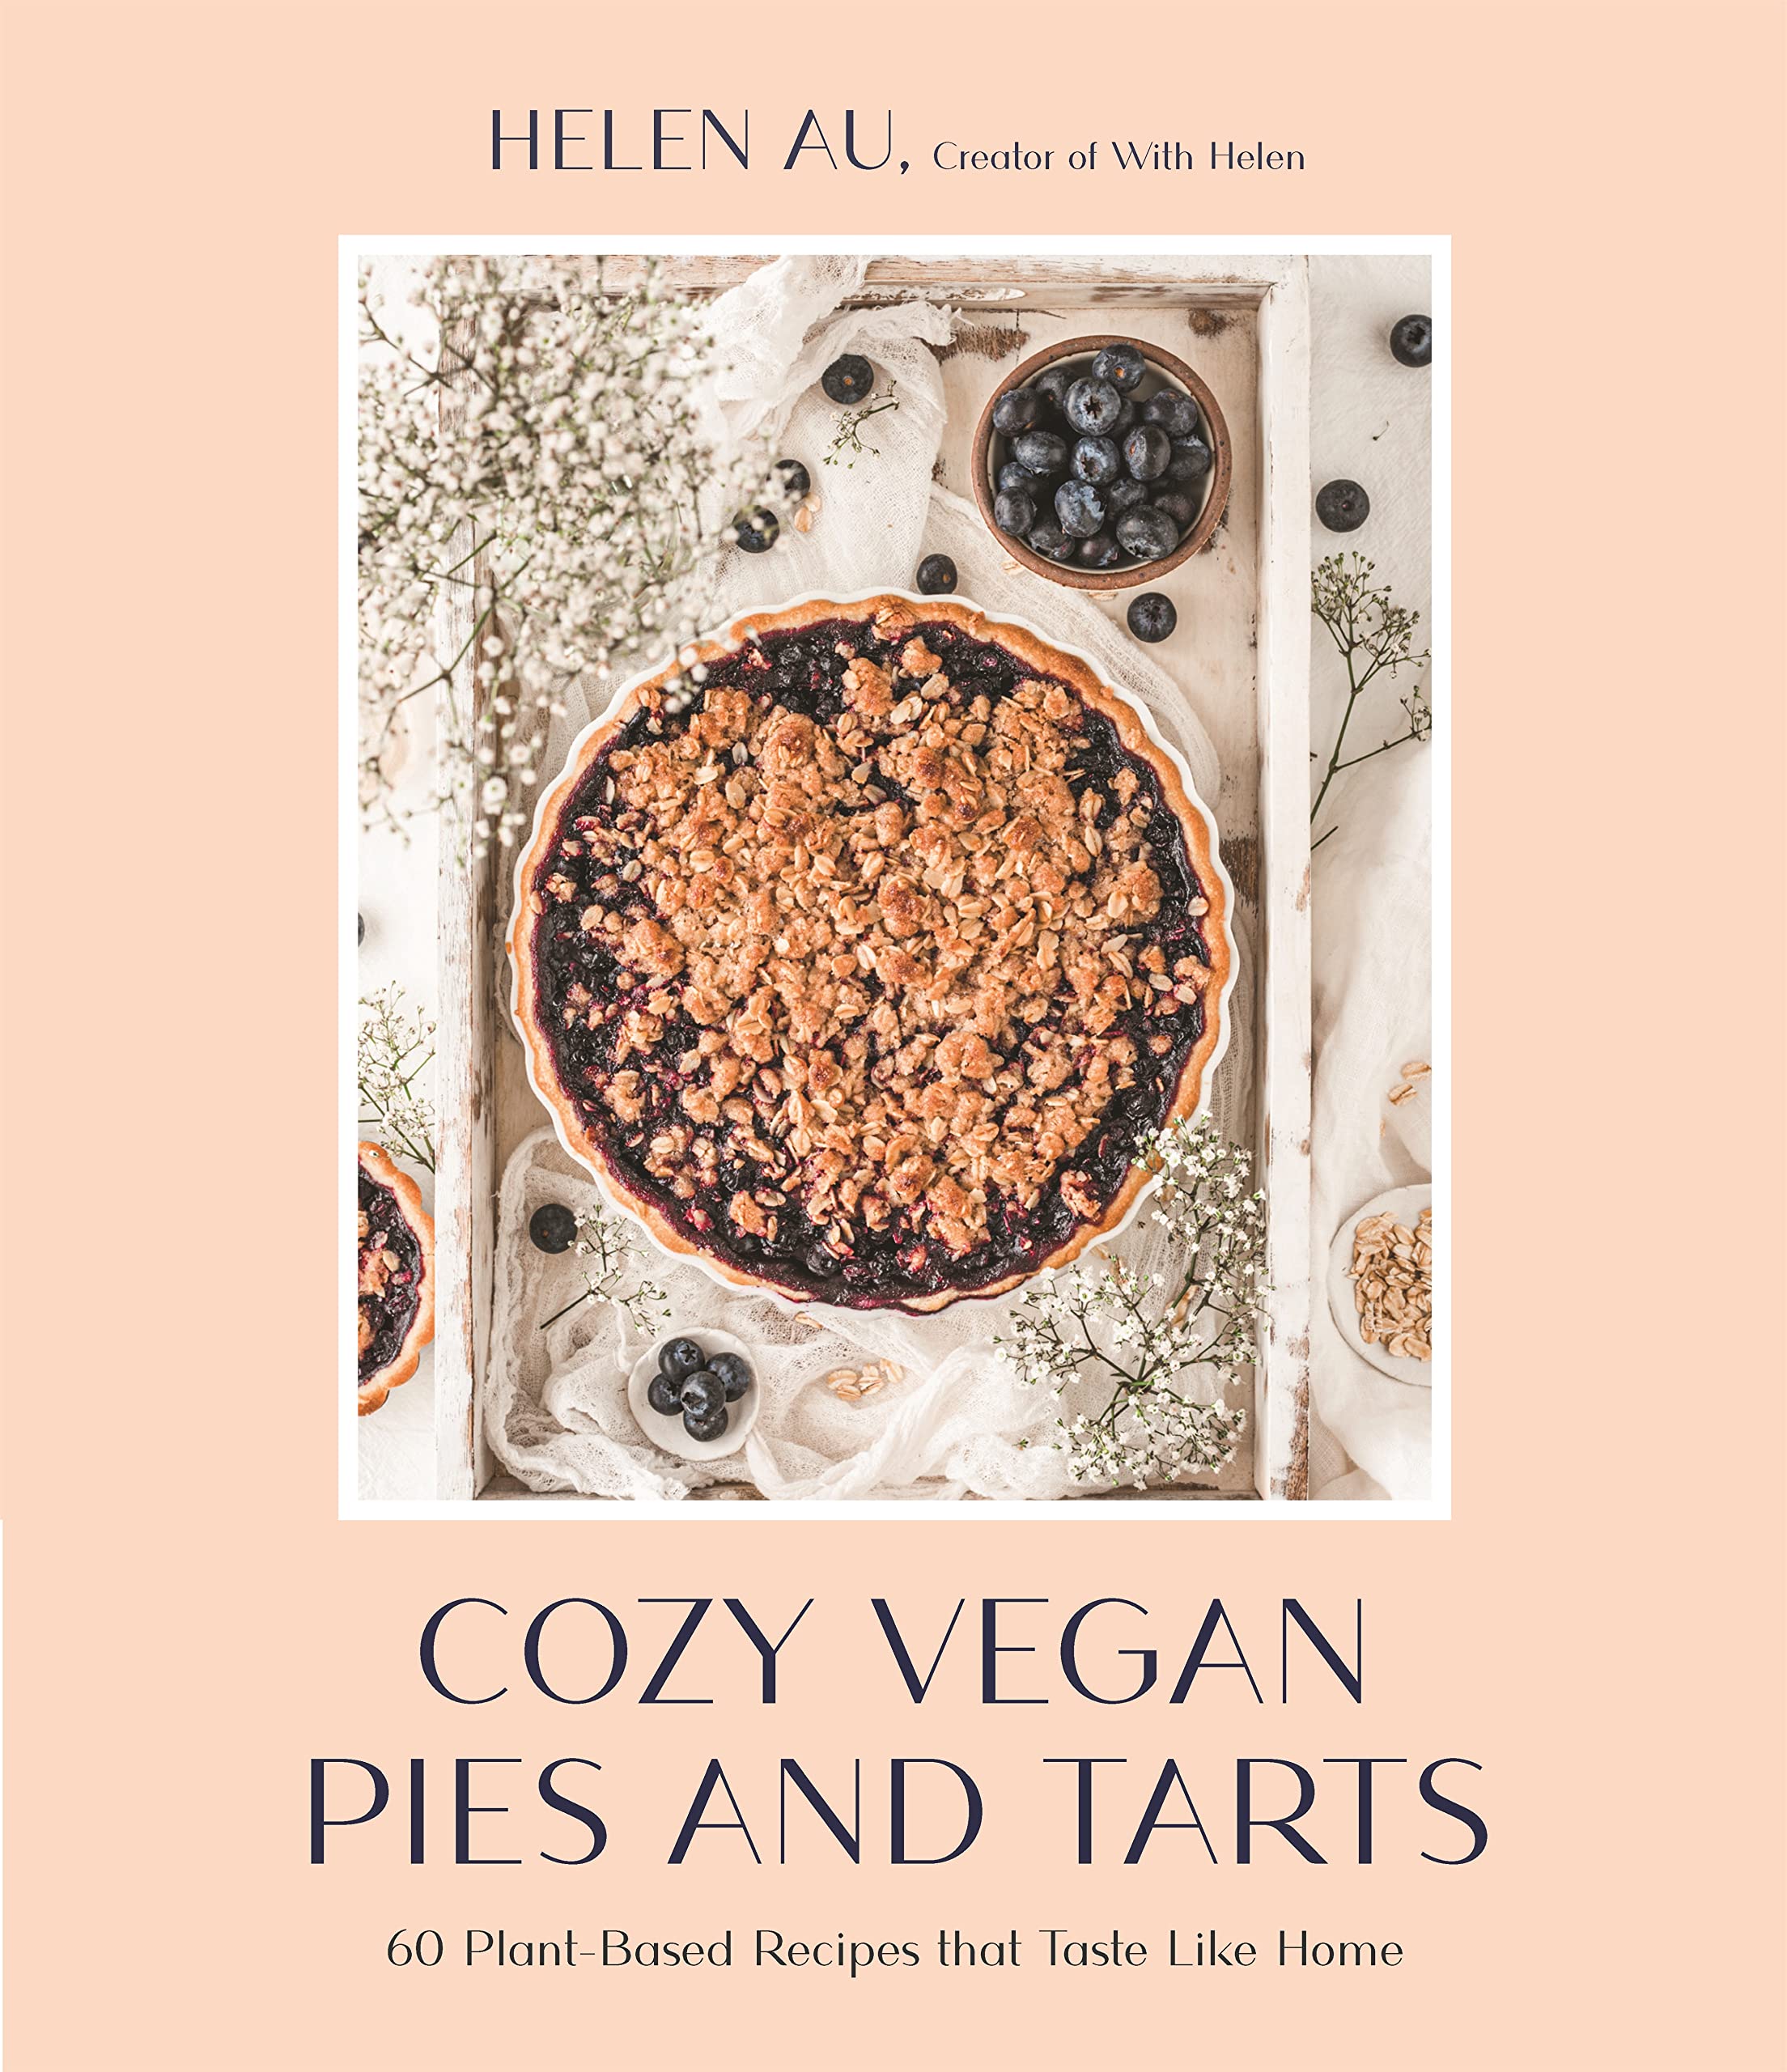 Cozy Vegan Pies and Tarts: 60 Plant-Based Recipes that Taste Like Home (Helen Au)